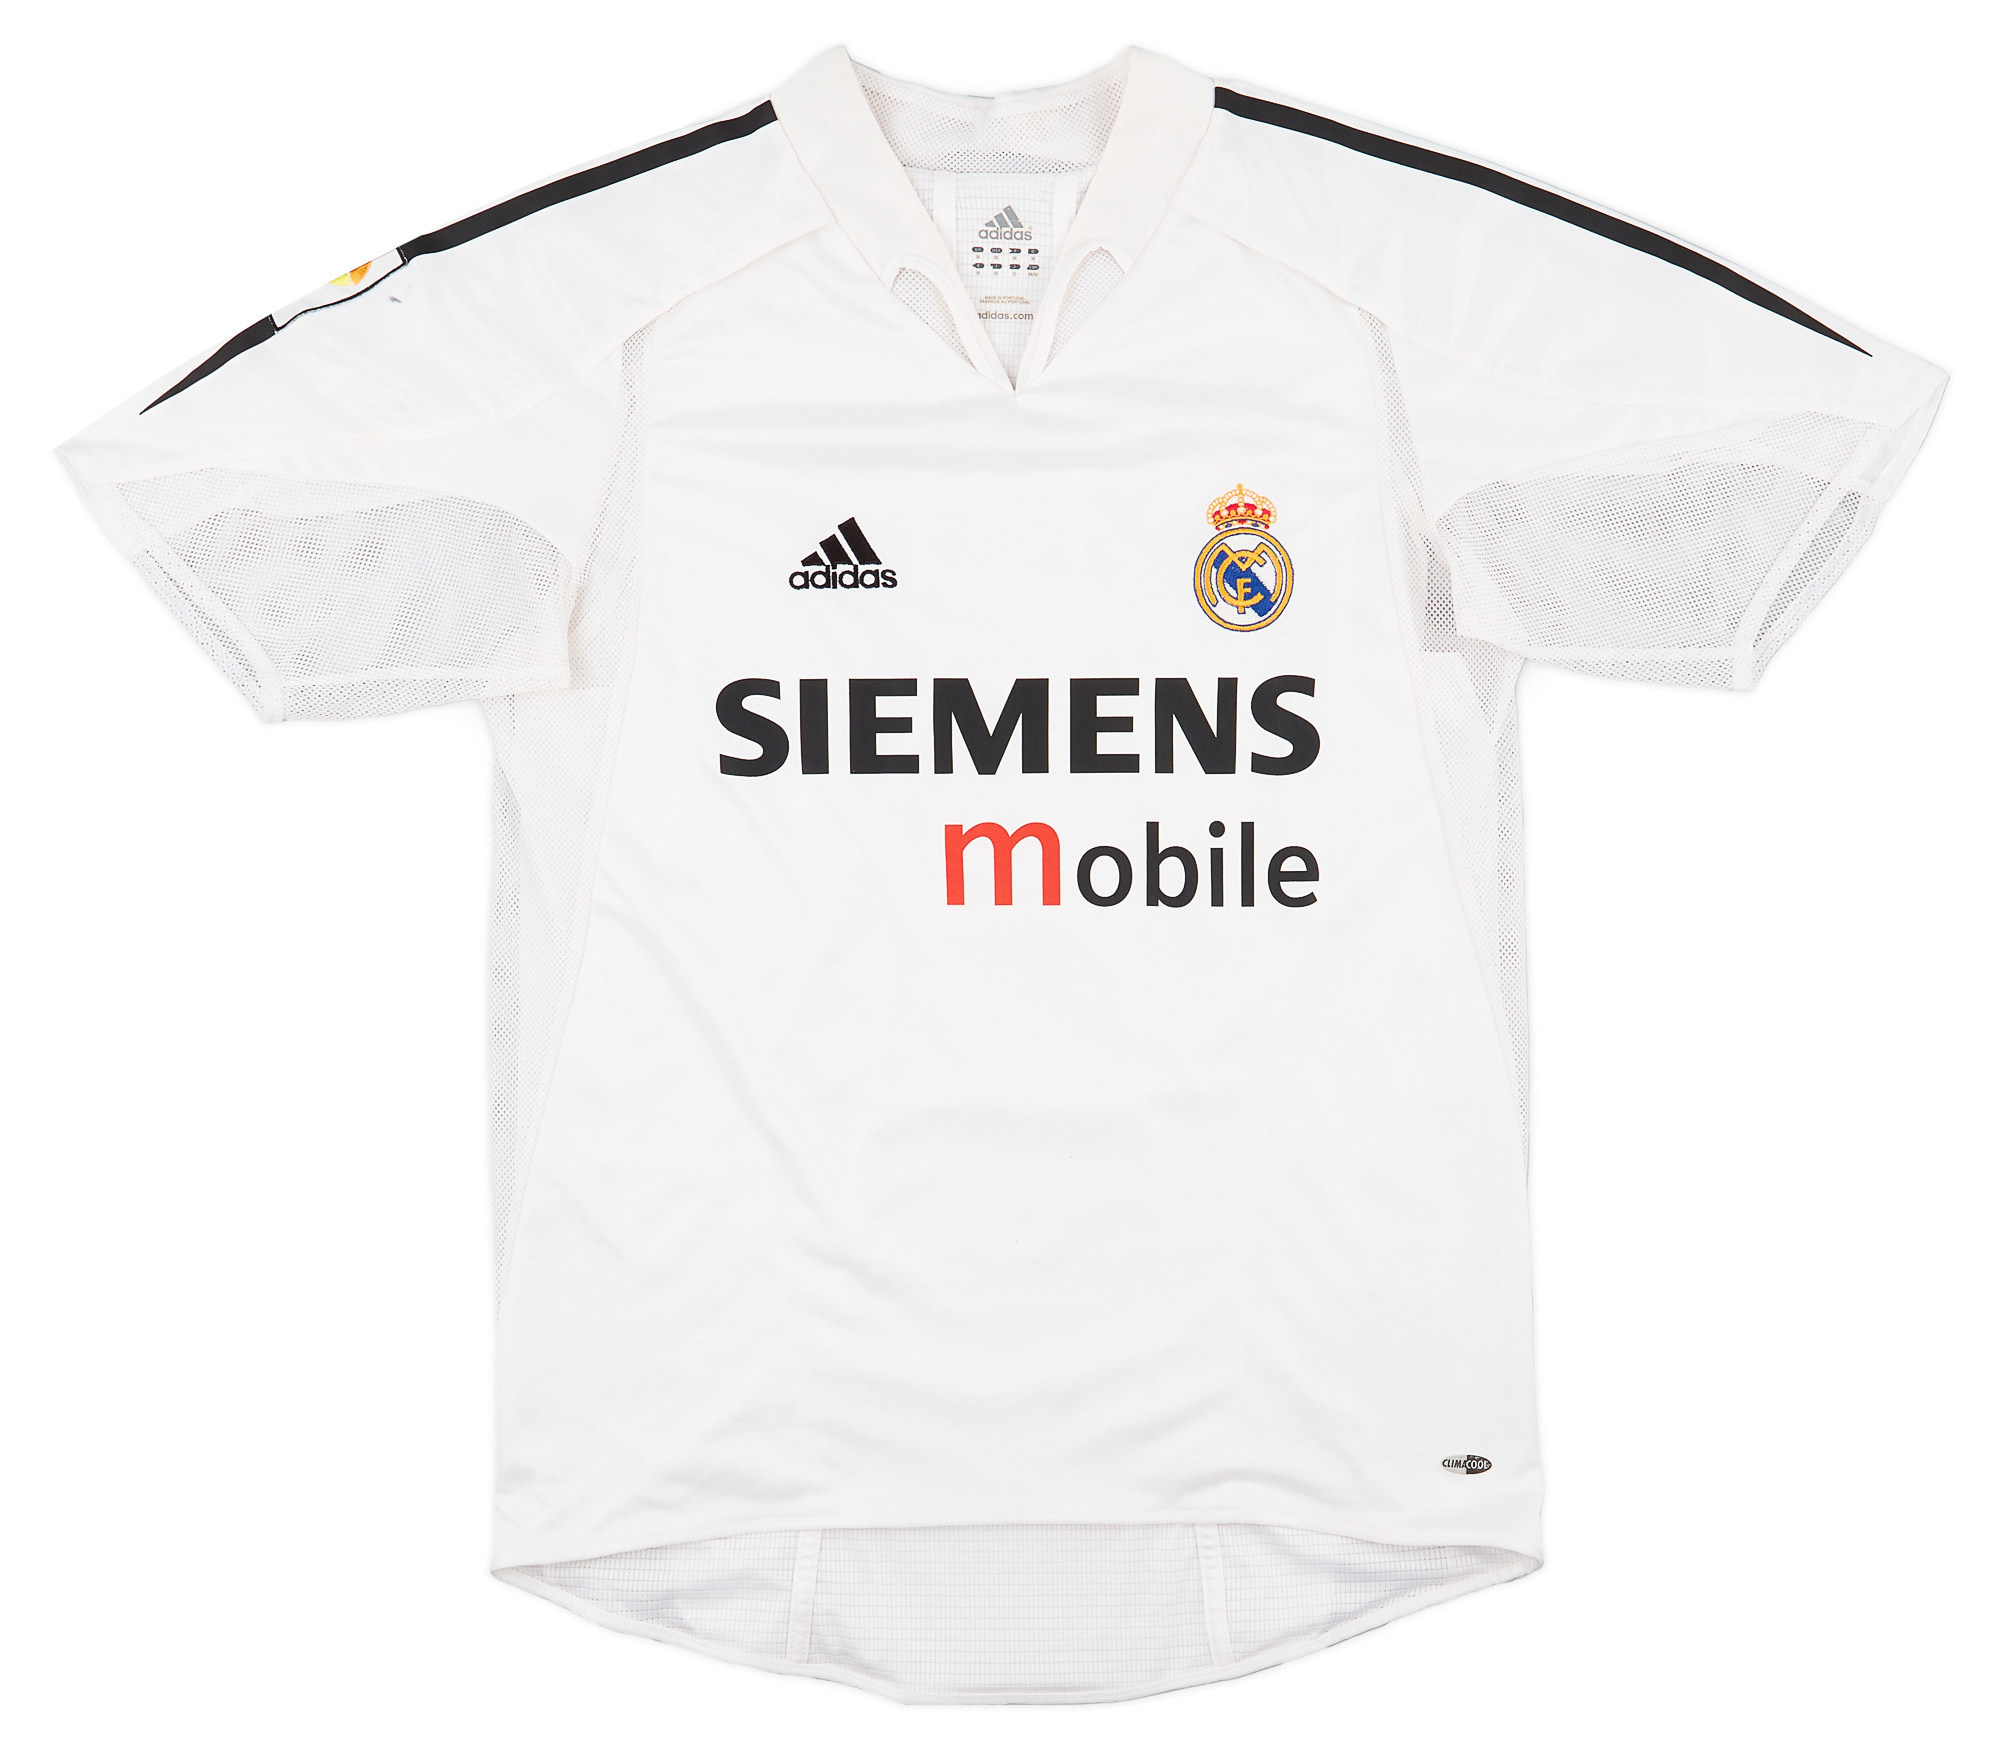 2004-05 Real Madrid Authentic Home Shirt - Very Good 7/10 - ()